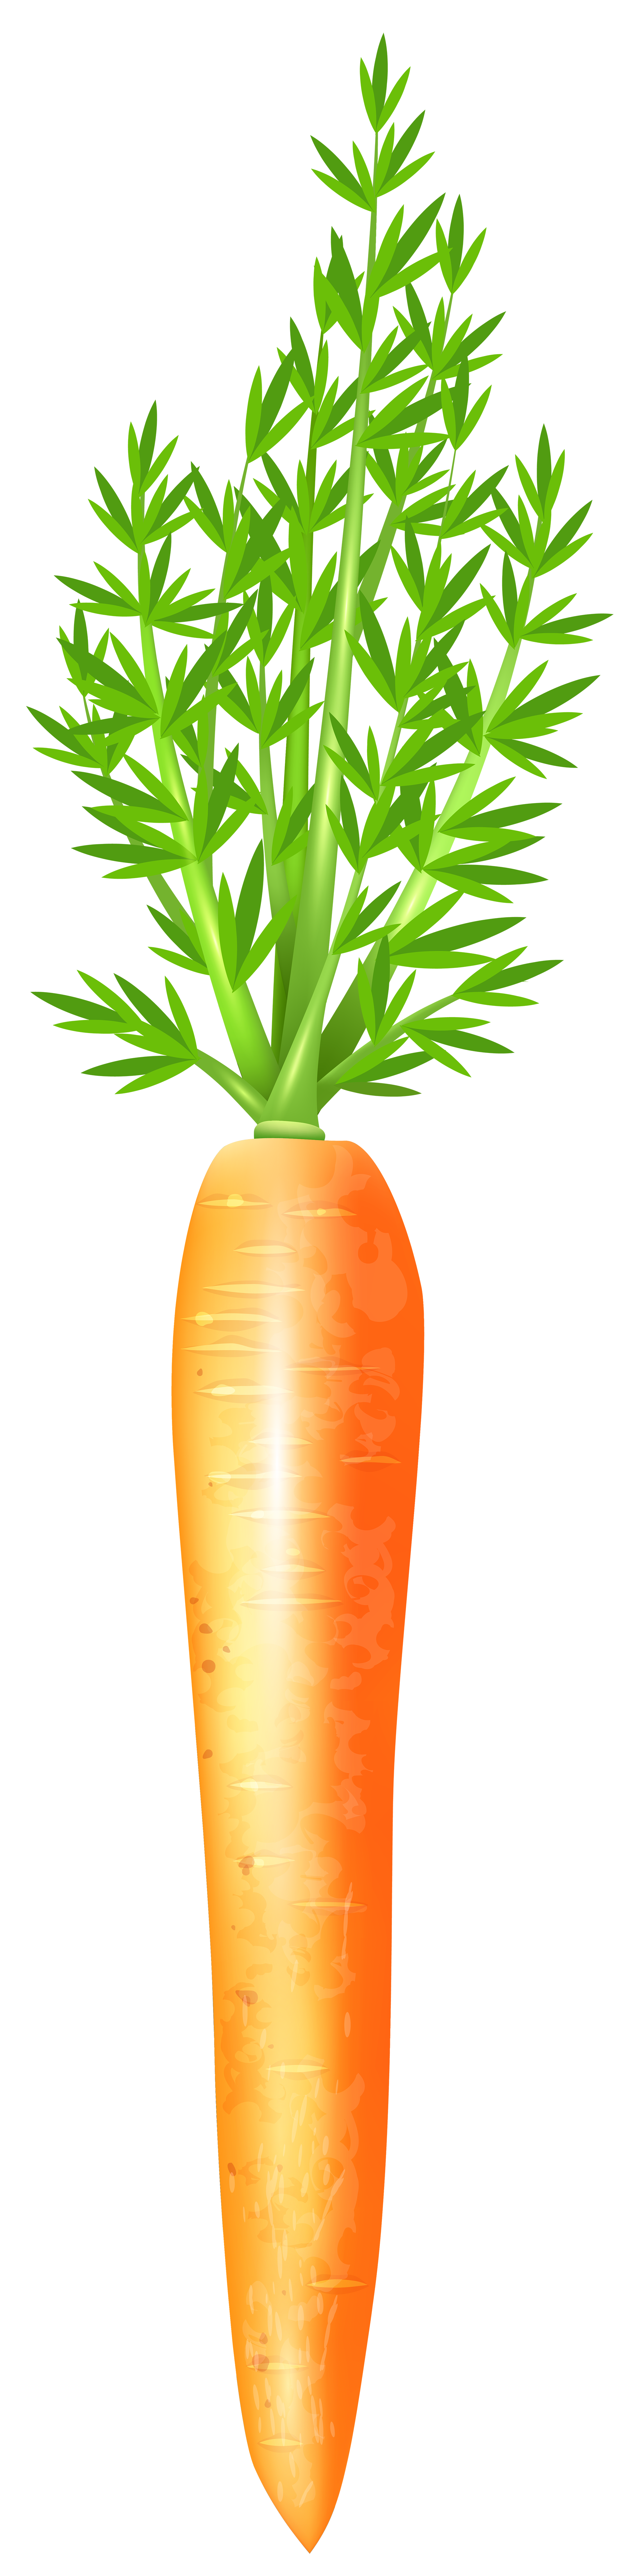 Carrot Free PNG Clip Art Image.